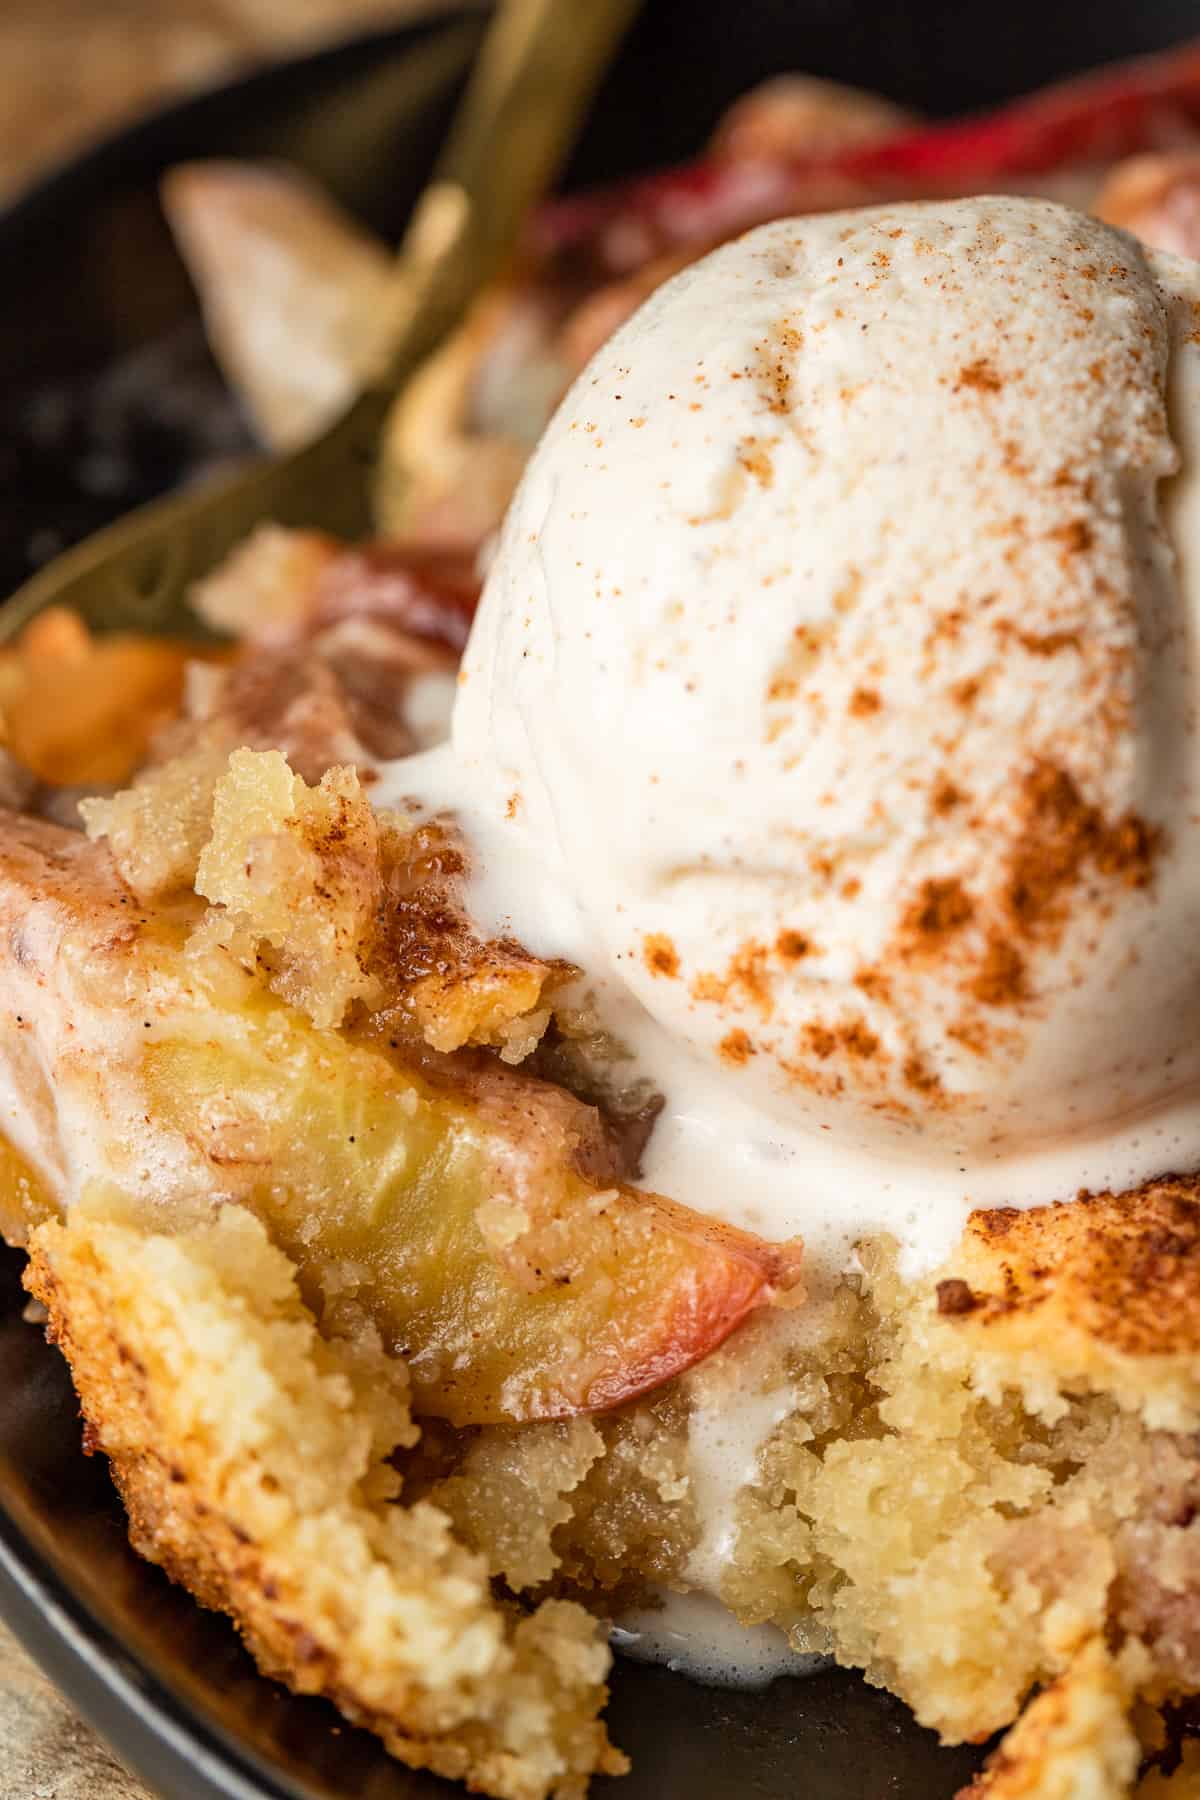 Peach cobbler in a cast iron skillet topped with a scoop of melting ice cream and cinnamon.